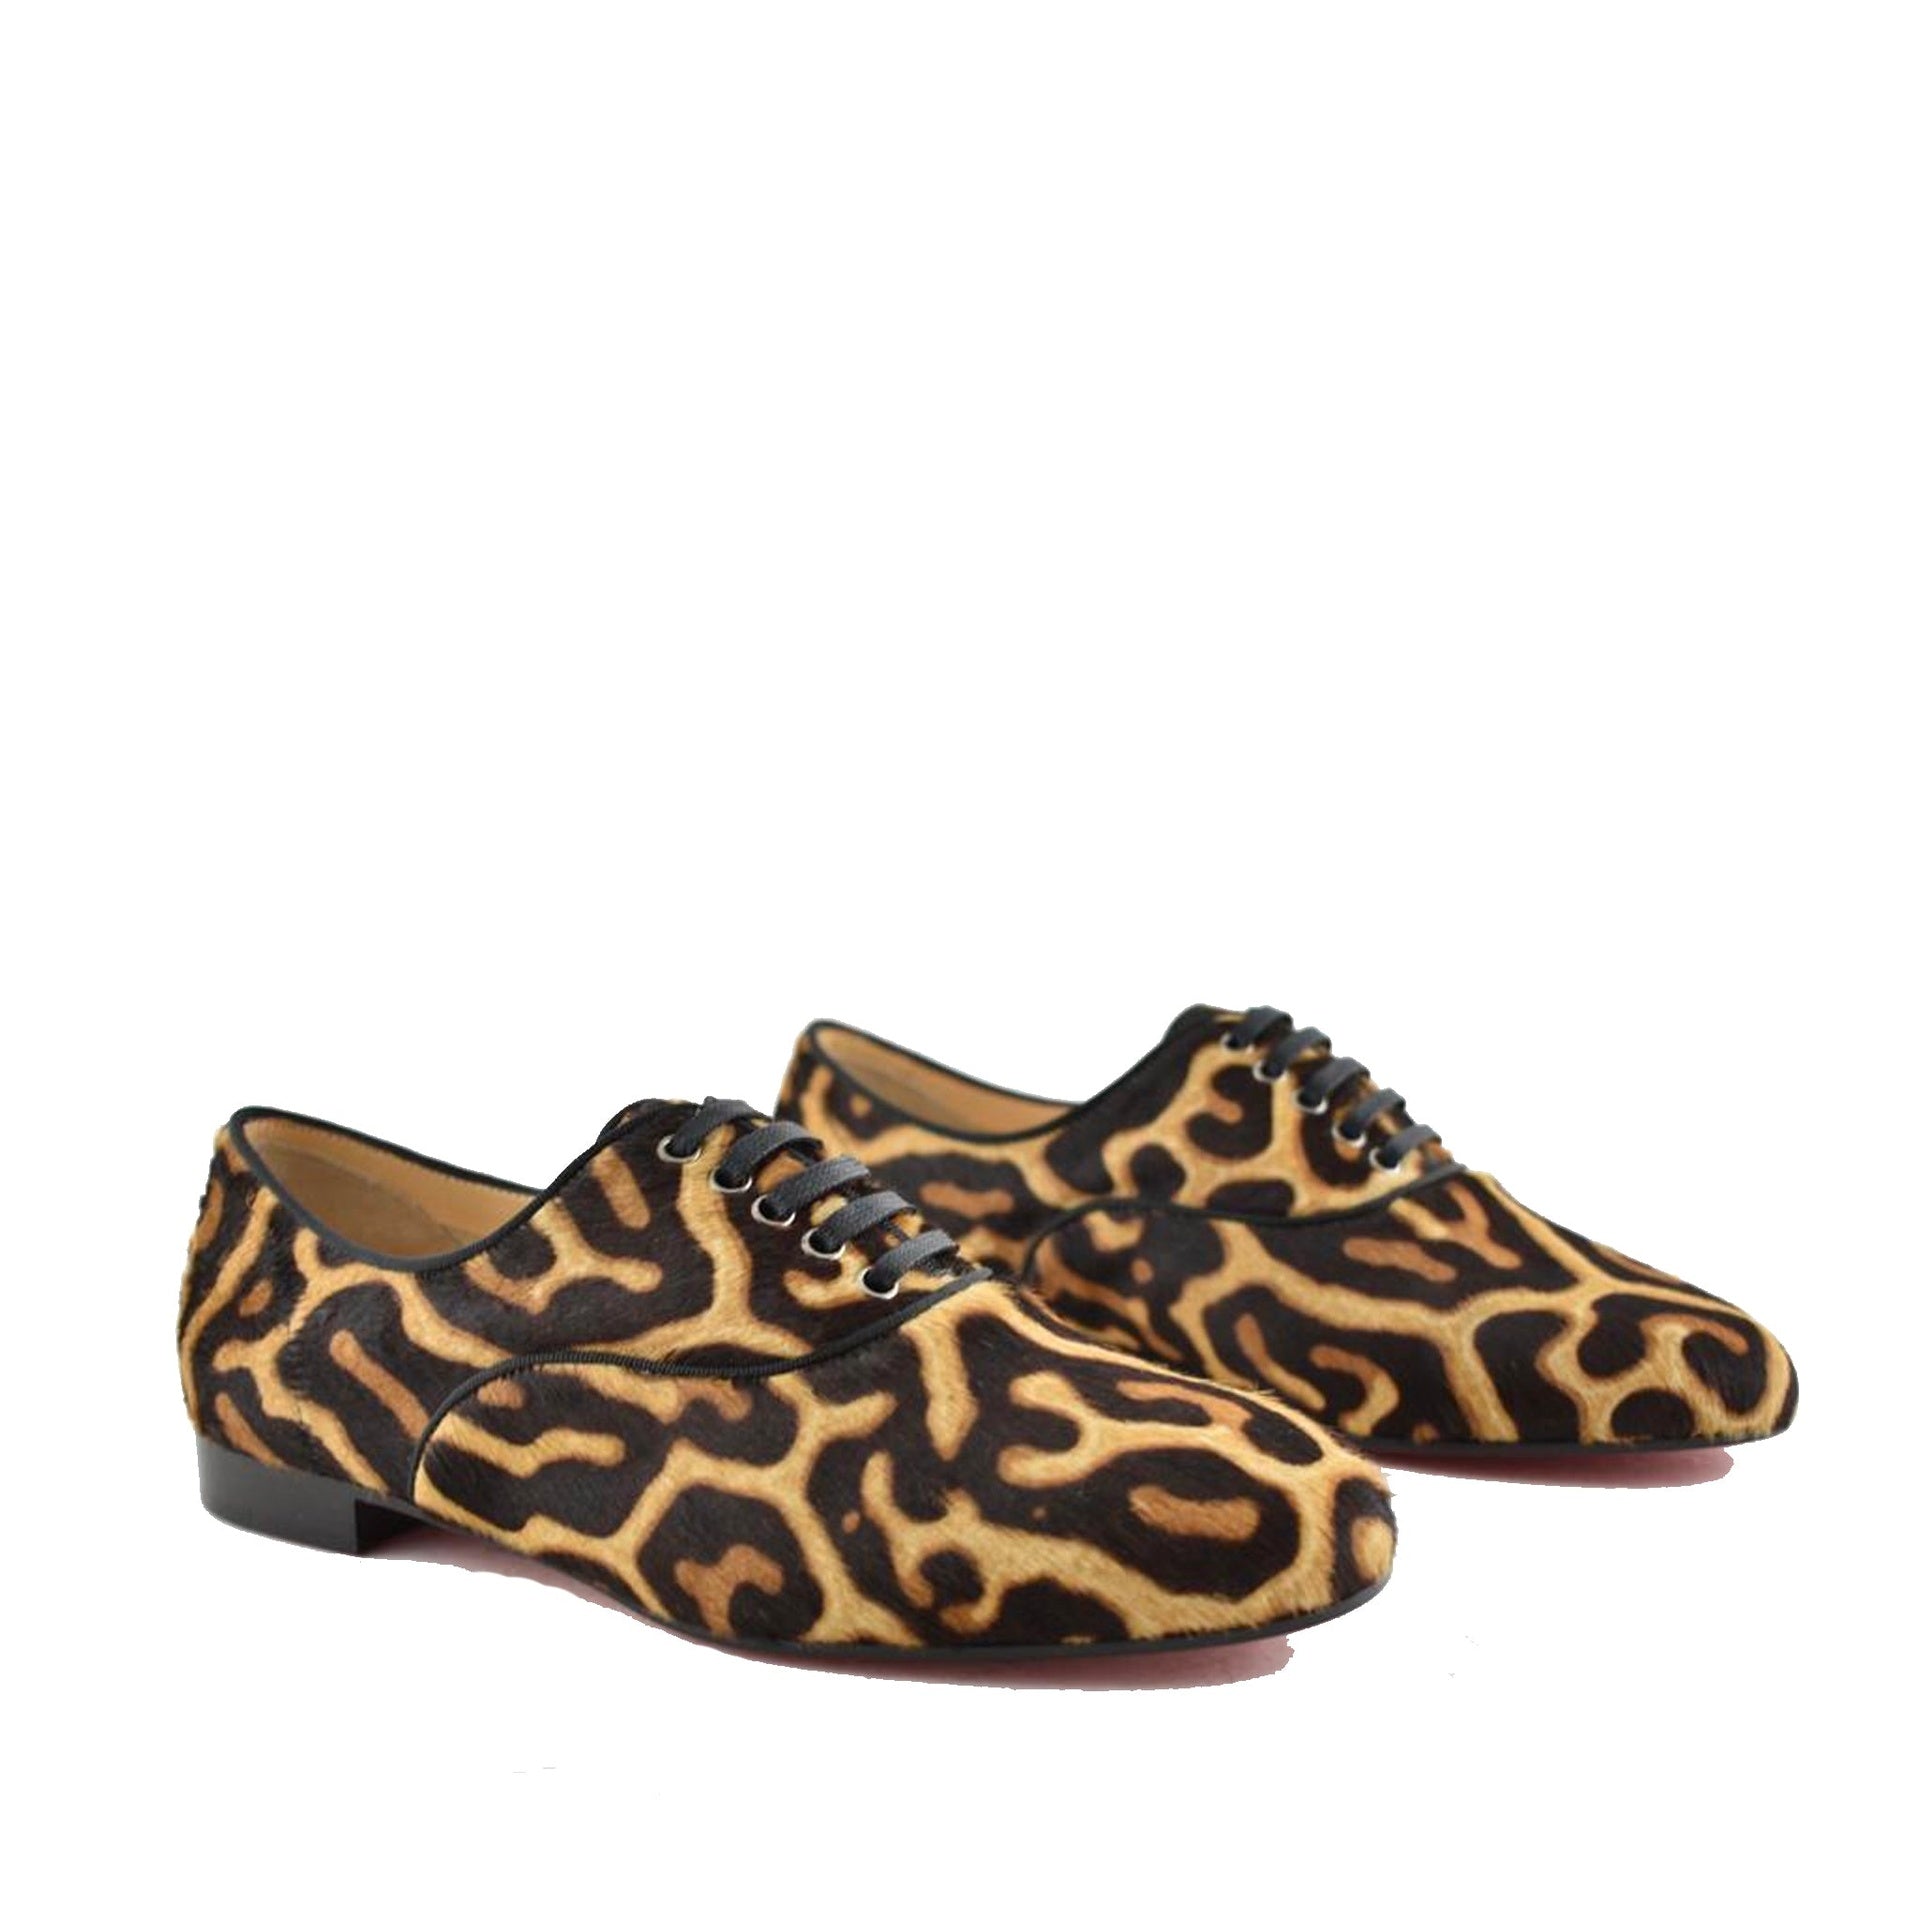 CHRISTIAN-LOUBOUTIN-OUTLET-SALE-Christian-Louboutin-New-Fred-Leopard-Flats-Flache-Schuhe-BROWN-36-ARCHIVE-COLLECTION-2.jpg